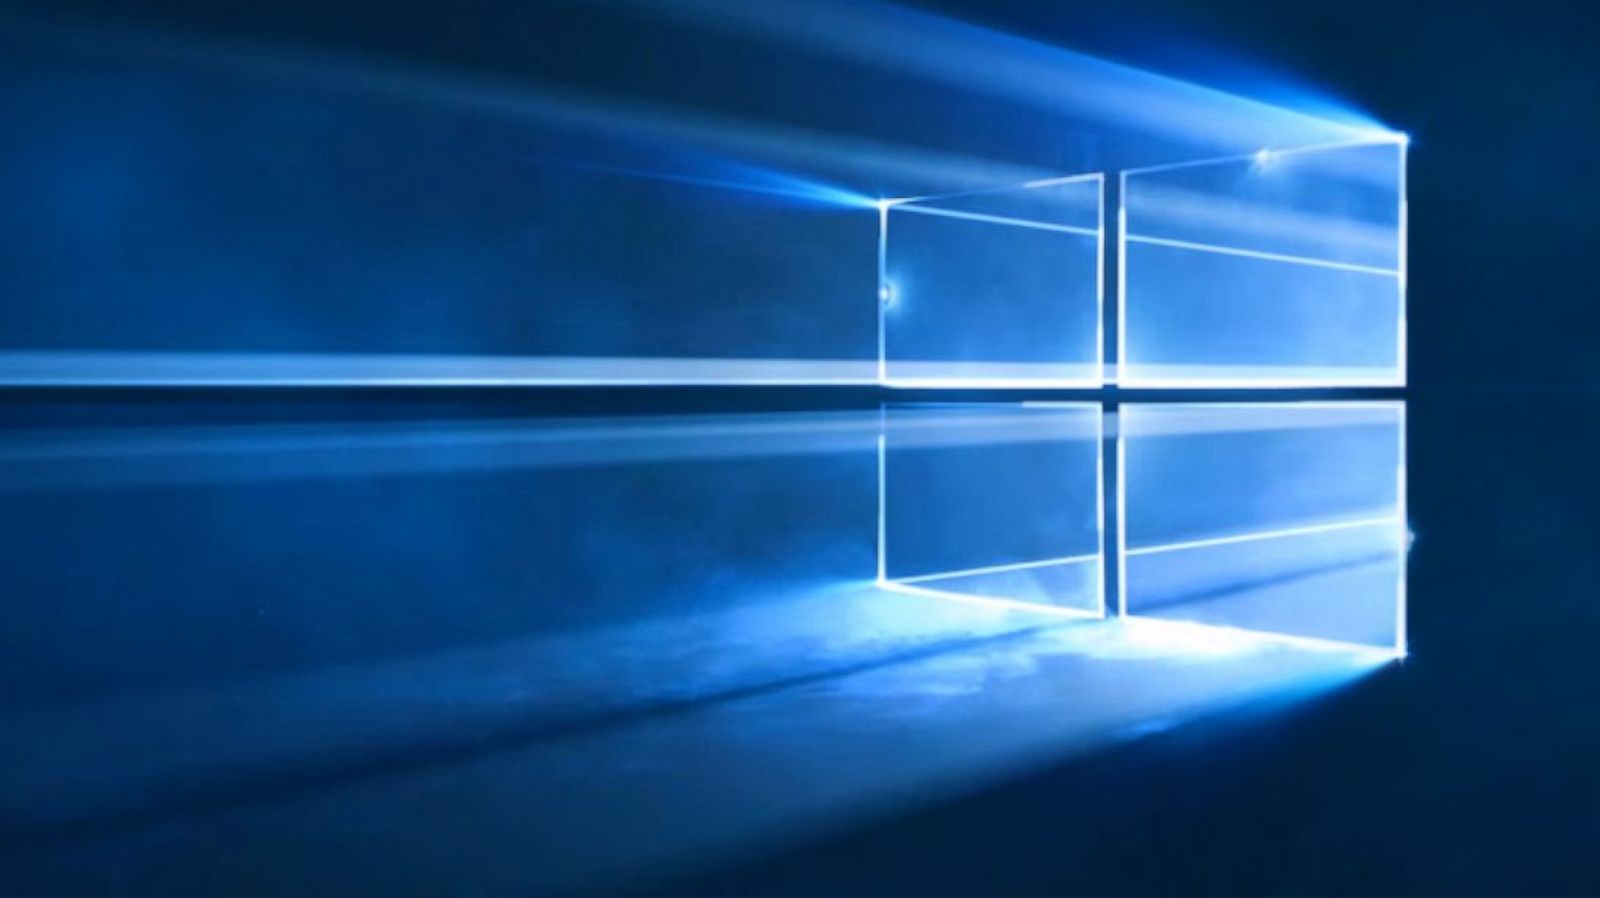 Windows 10 Lasers Smoke Machines And Falling Crystals Help Make New Wallpaper Abc News